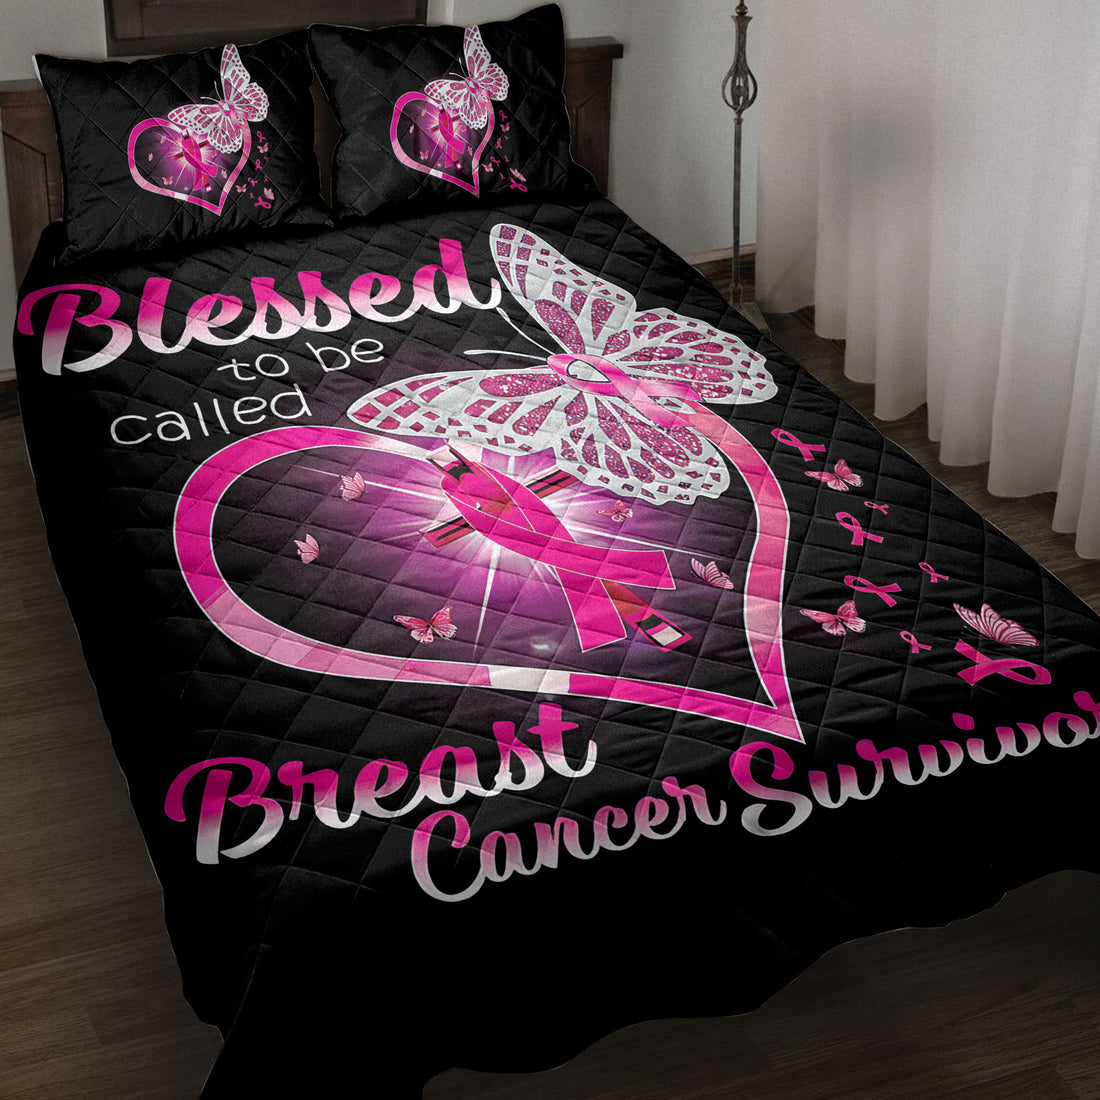 Ohaprints-Quilt-Bed-Set-Pillowcase-Blessed-To-Be-Called-Breast-Cancer-Survivor-Blanket-Bedspread-Bedding-3836-Throw (55'' x 60'')